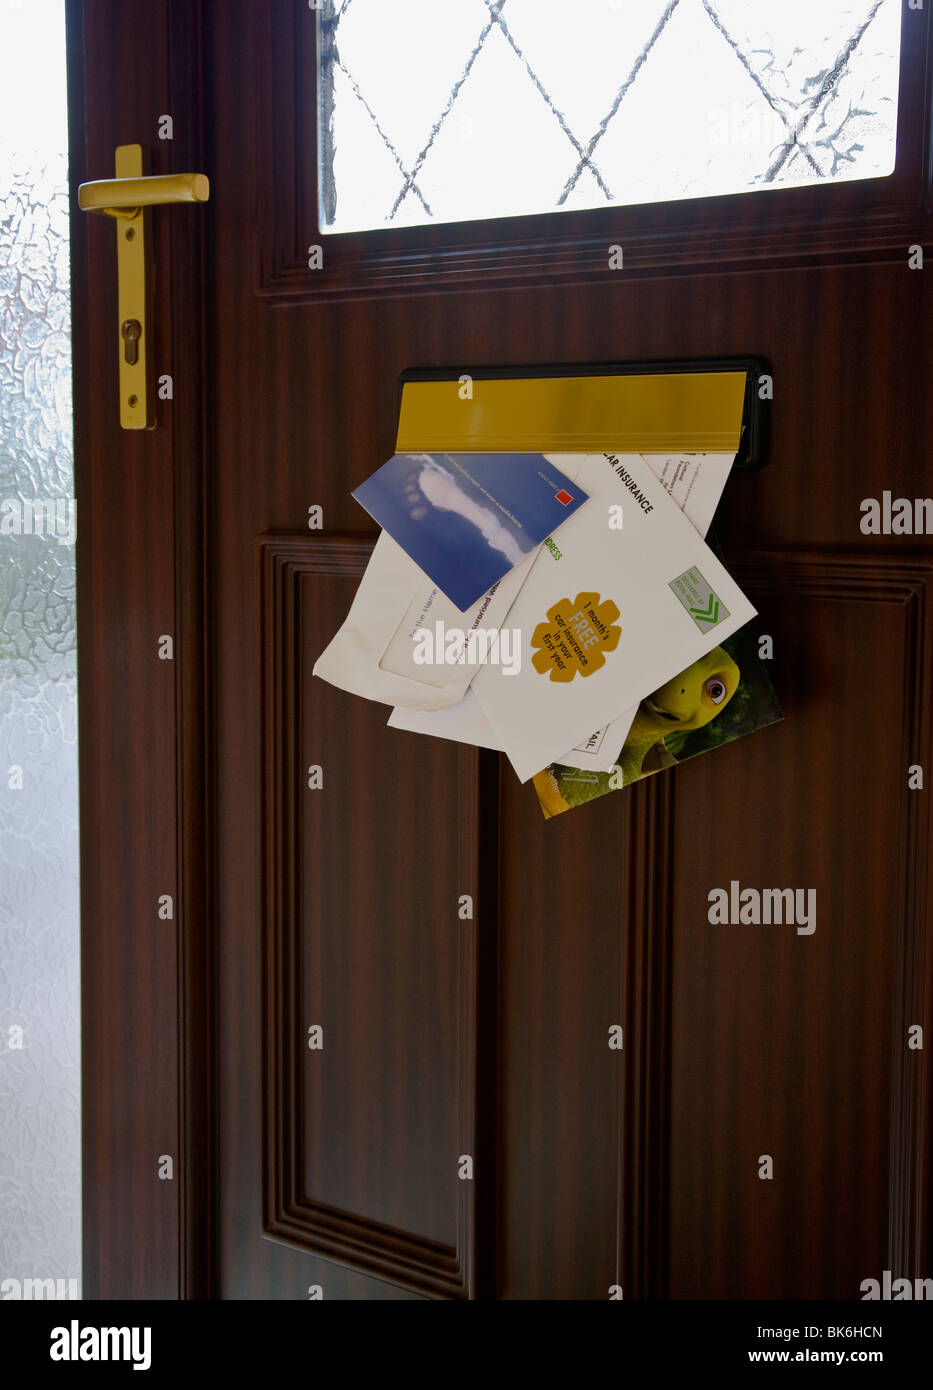 Junk mail delivery Stock Photo